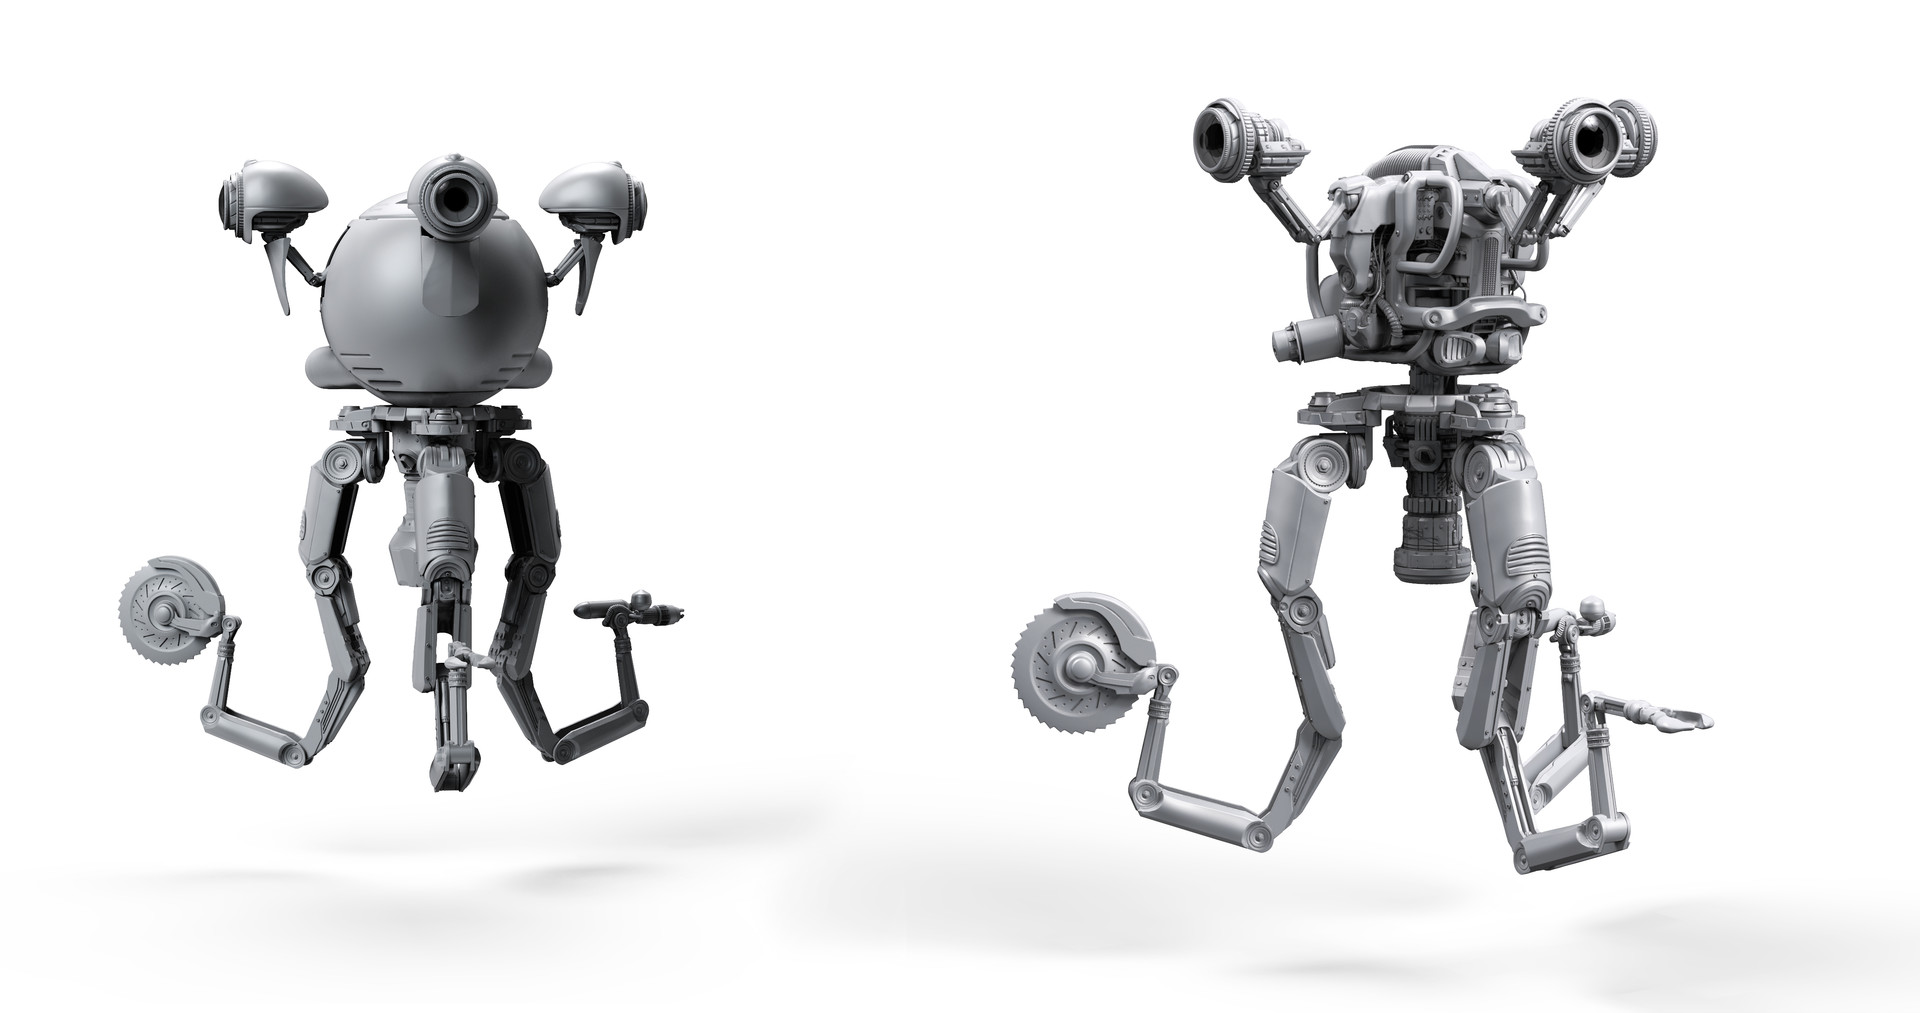 Making Fallout 4's Robot Butler Mister Handy Real Using 3D